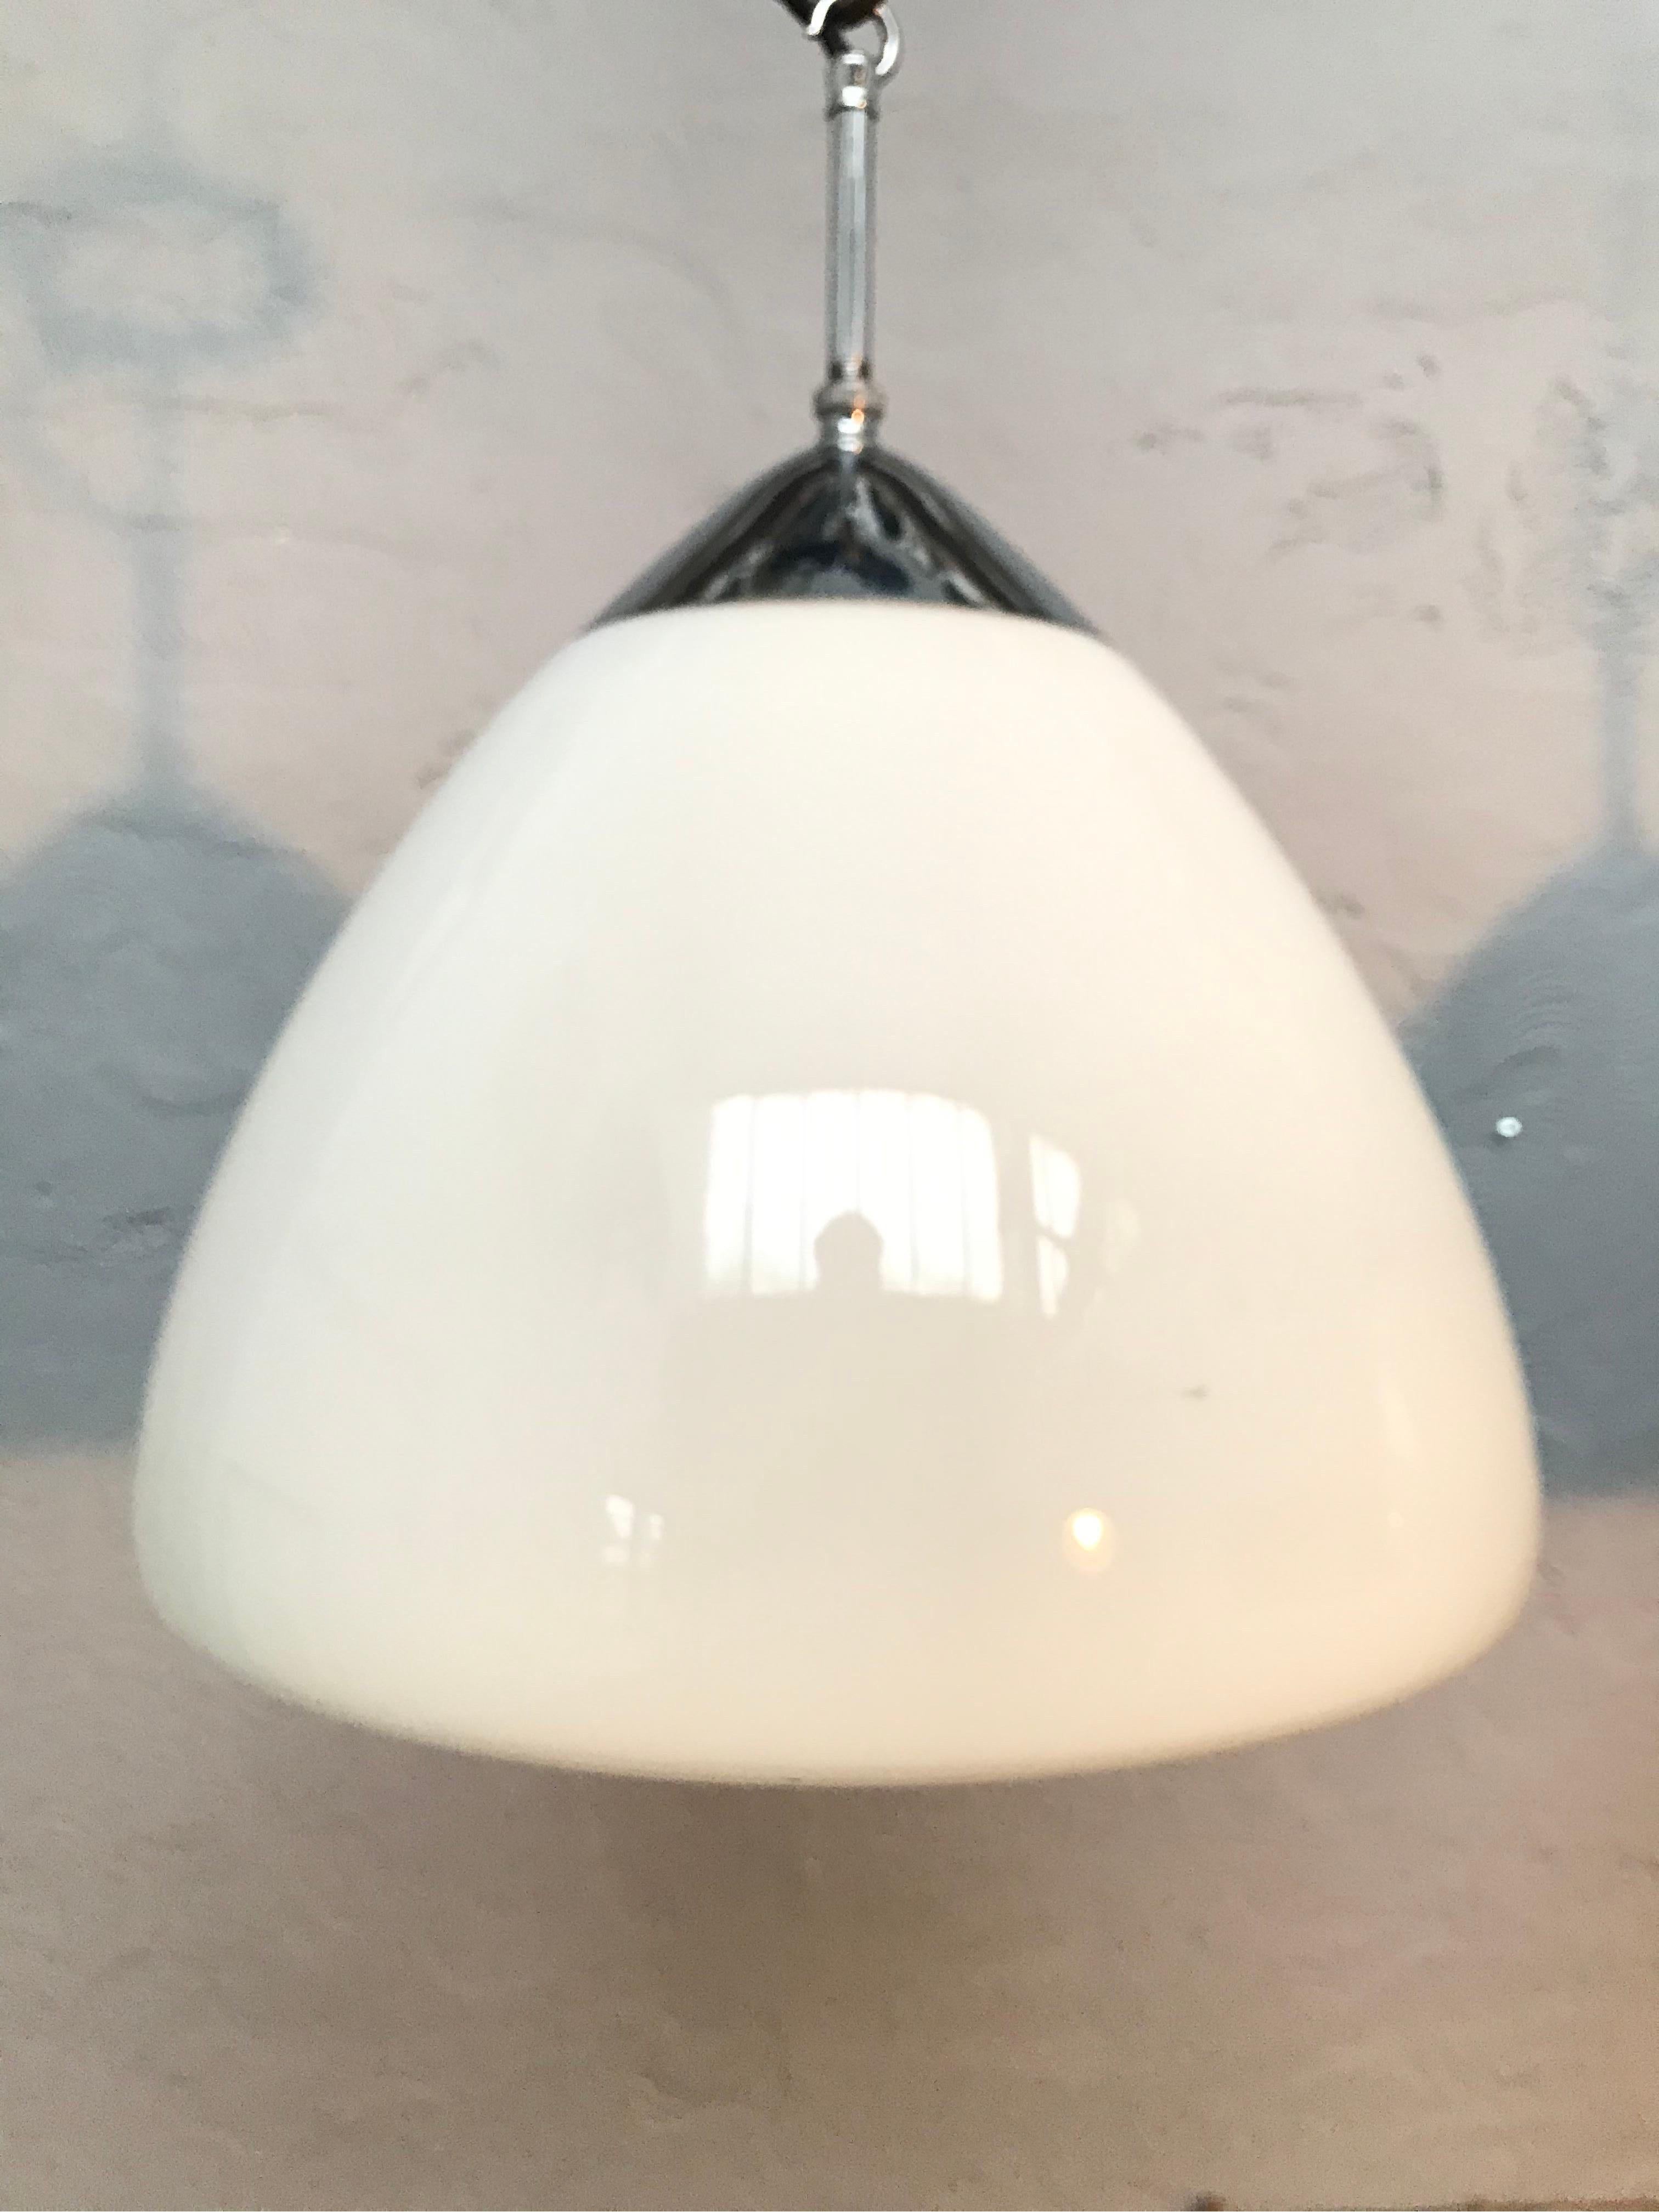 Vintage Danish Vilhelm Lauritzen for Louis Poulsen opaline bell shaped hand blown glass pendant chandeliers.
In original condition with new wiring and grounded.
Hanging on a 10cm long nickel-plated copper pipe.
Great midcentury Danish design.
  